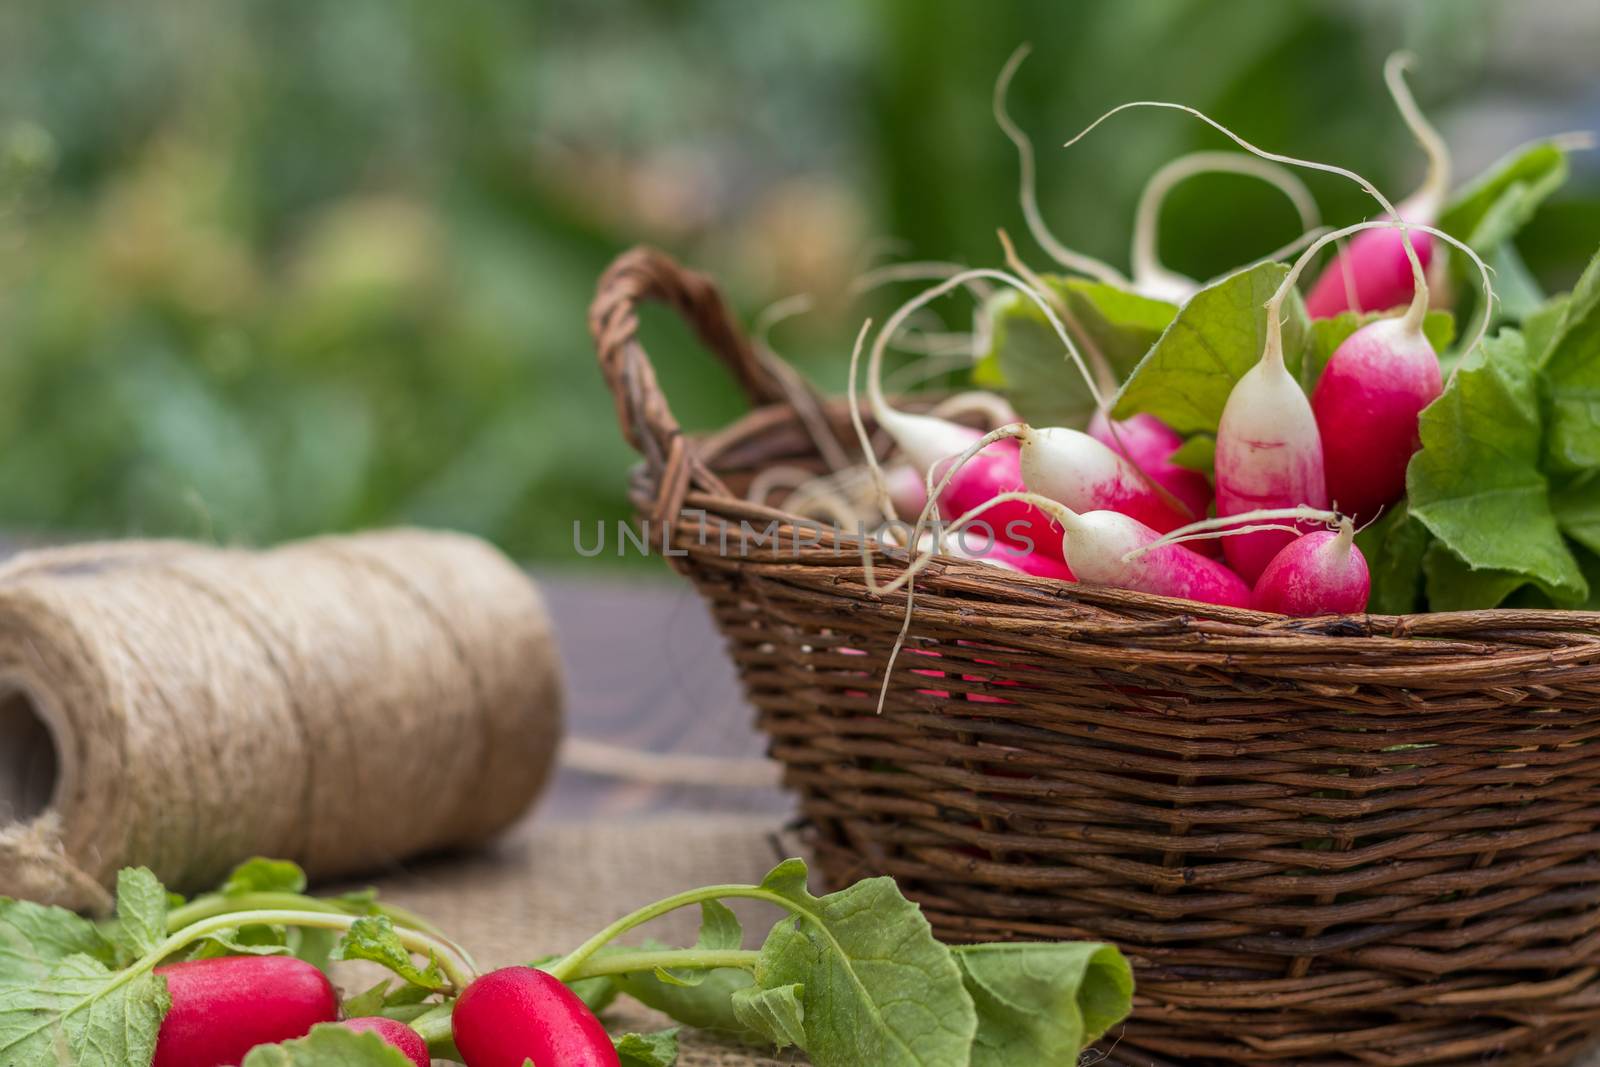 Bunch of fresh radishes in a wicker basket outdoors on the table